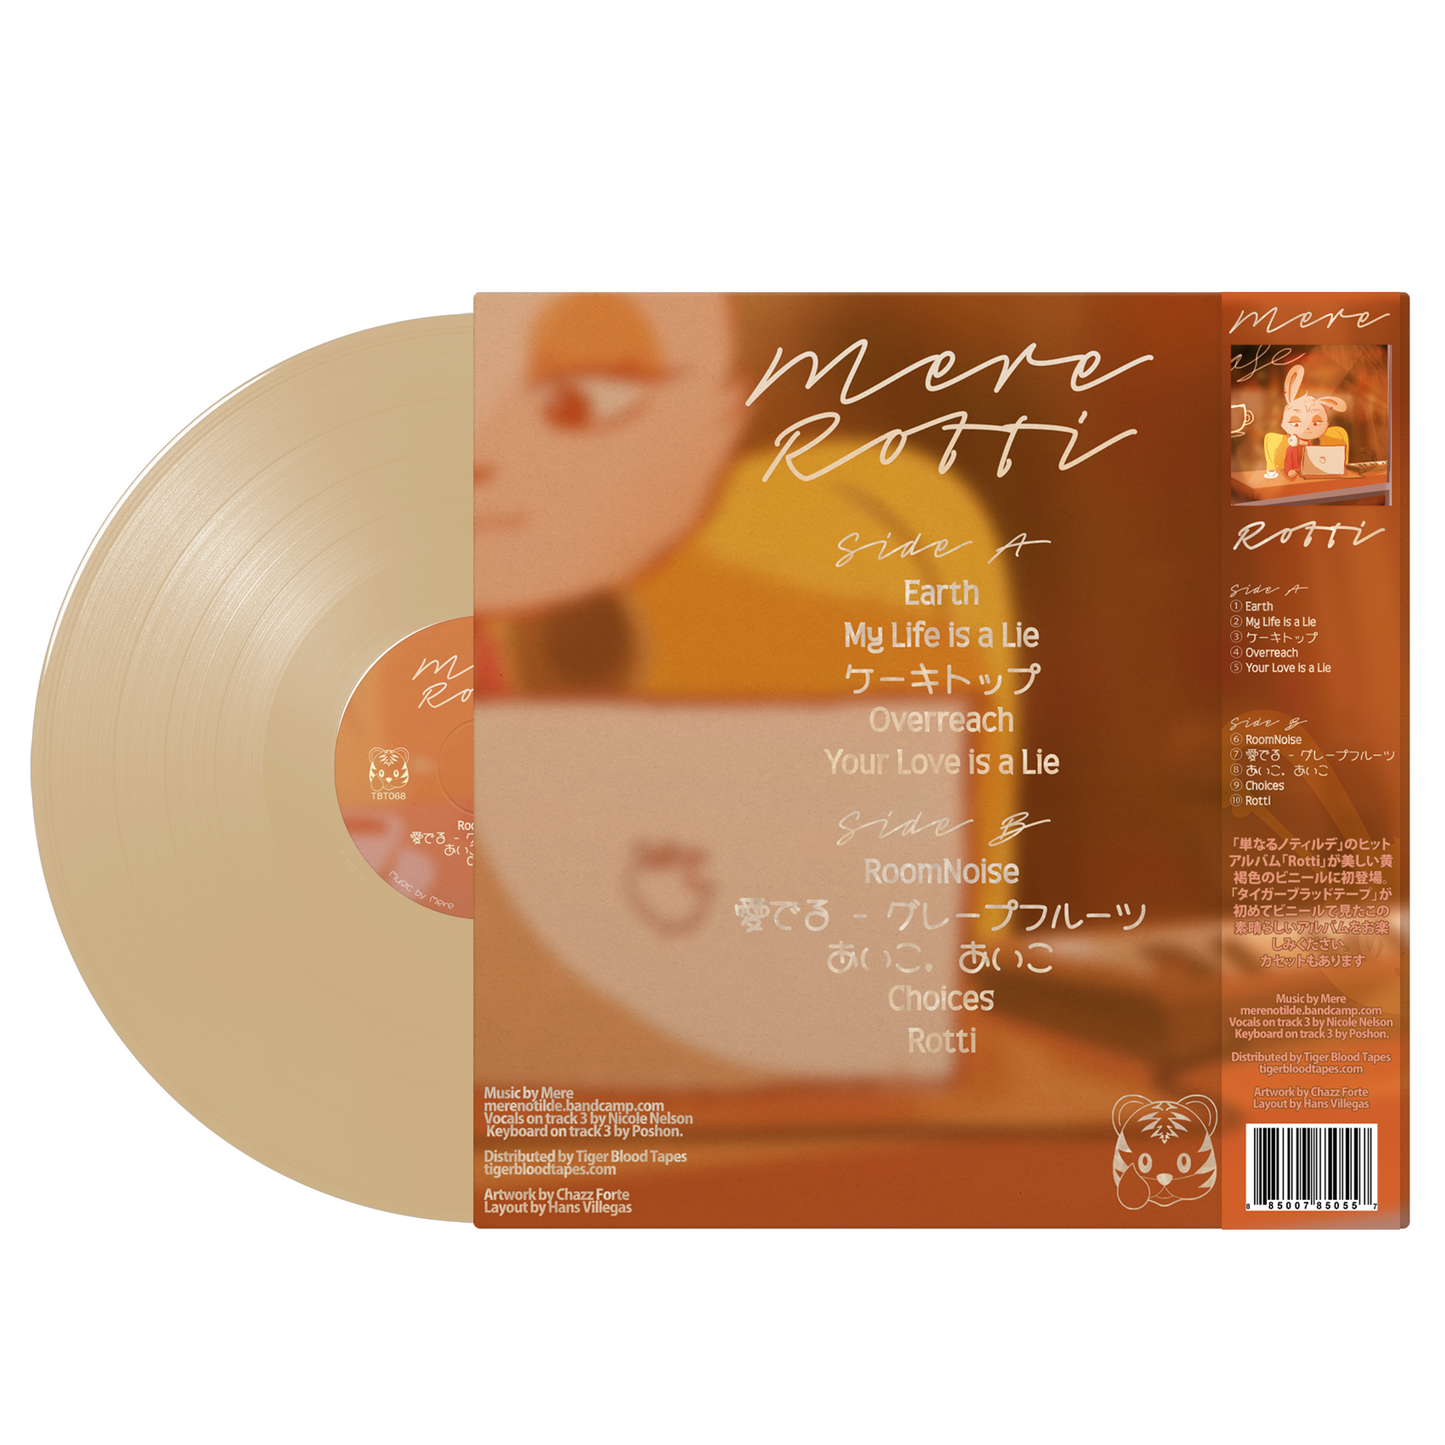 Mere - "Rotti" Limited Edition Iced Coffee Clear 12" Vinyl LP